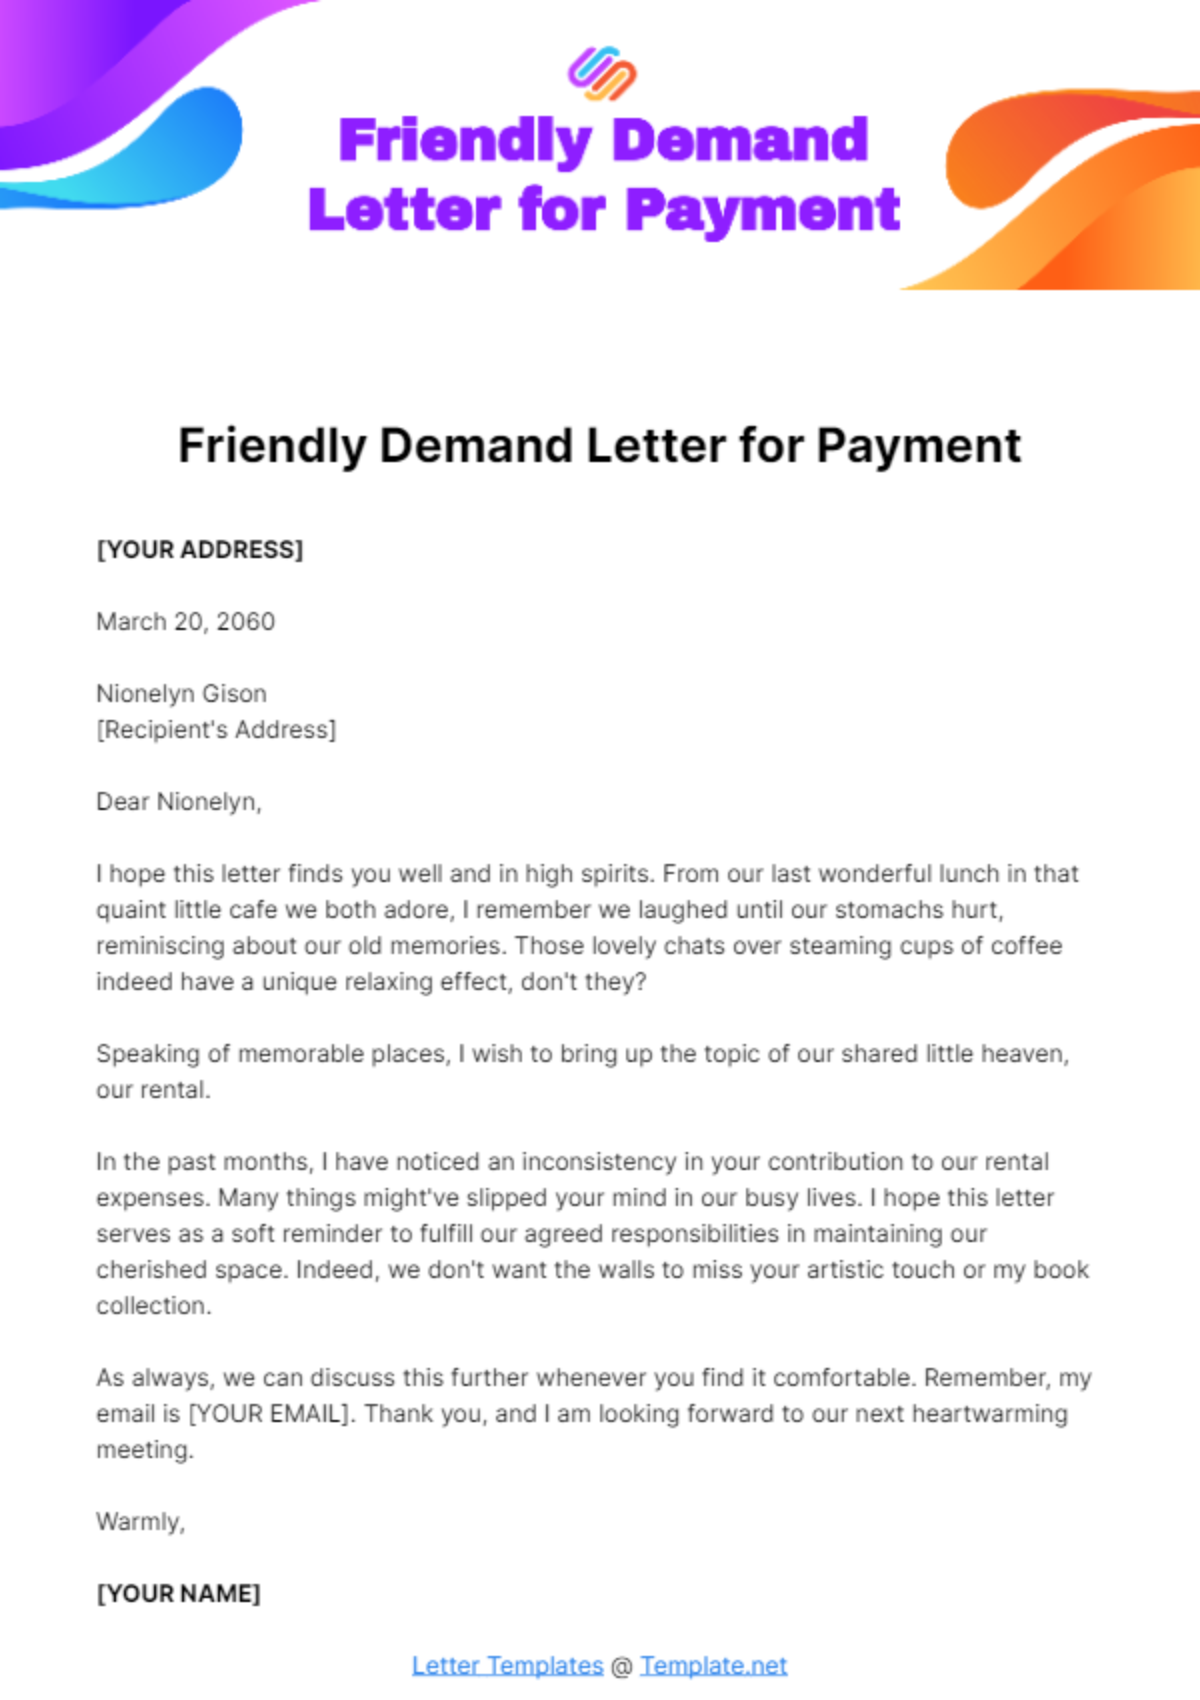 Free Friendly Demand Letter for Payment Template